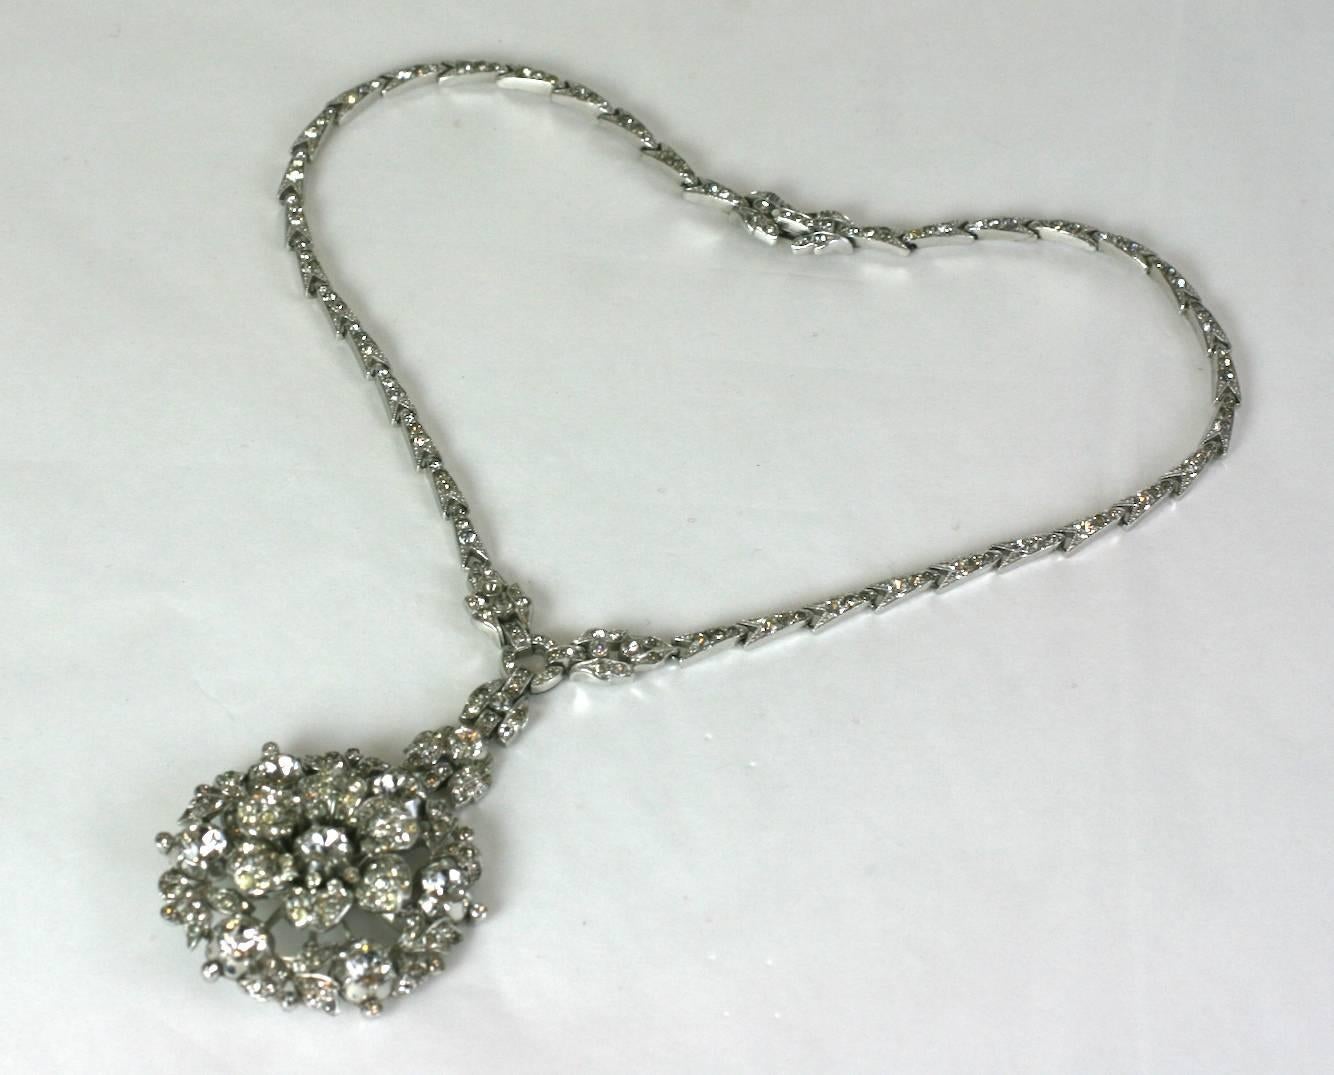 Trifari Alfred Philippe Pave  Regence Georgian Revival tremblant rose with garland pendant necklace of rhodium plated metal, and faceted crystal  rhinestones. 
Marked: Trifari with Crown, 1930's USA. 
Excellent condition. 
L 17